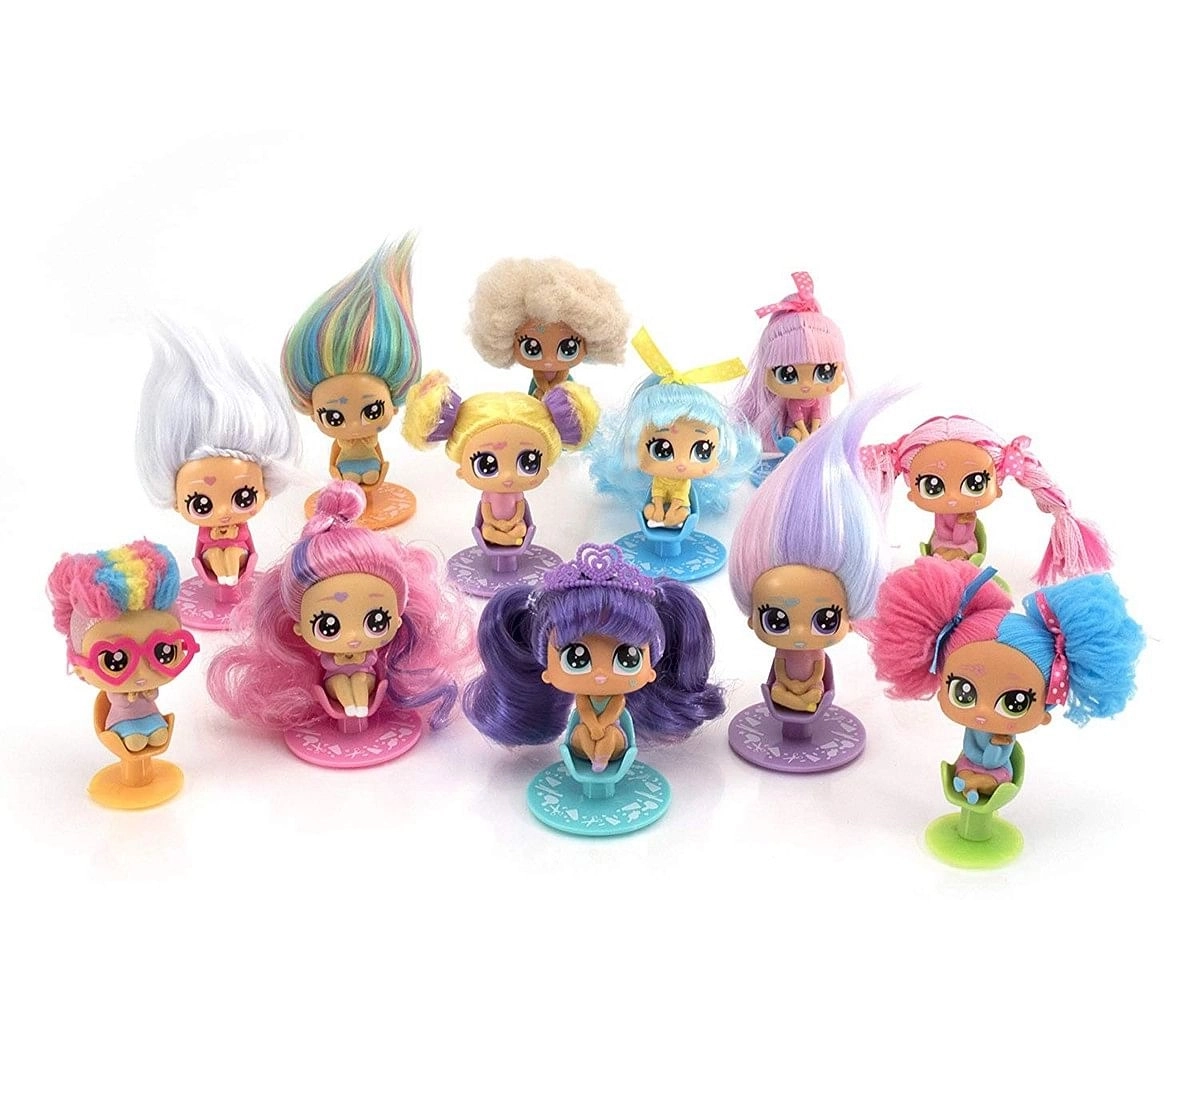 Hairdooz Shampoo Pack With Doll (Assorted) Collectible Dolls for Girls age 5Y+